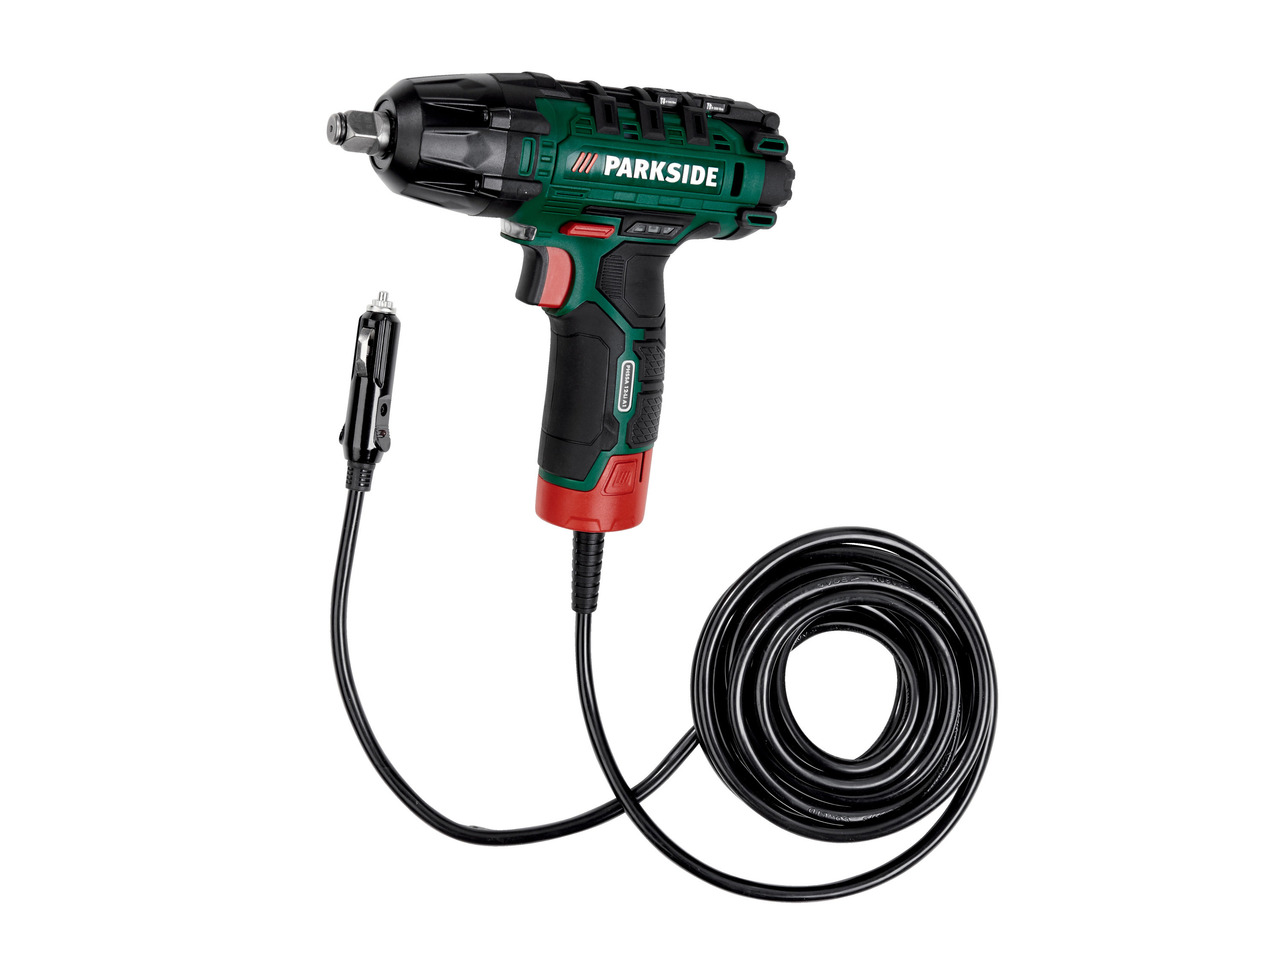 PARKSIDE Hybrid Cordless Impact Wrench